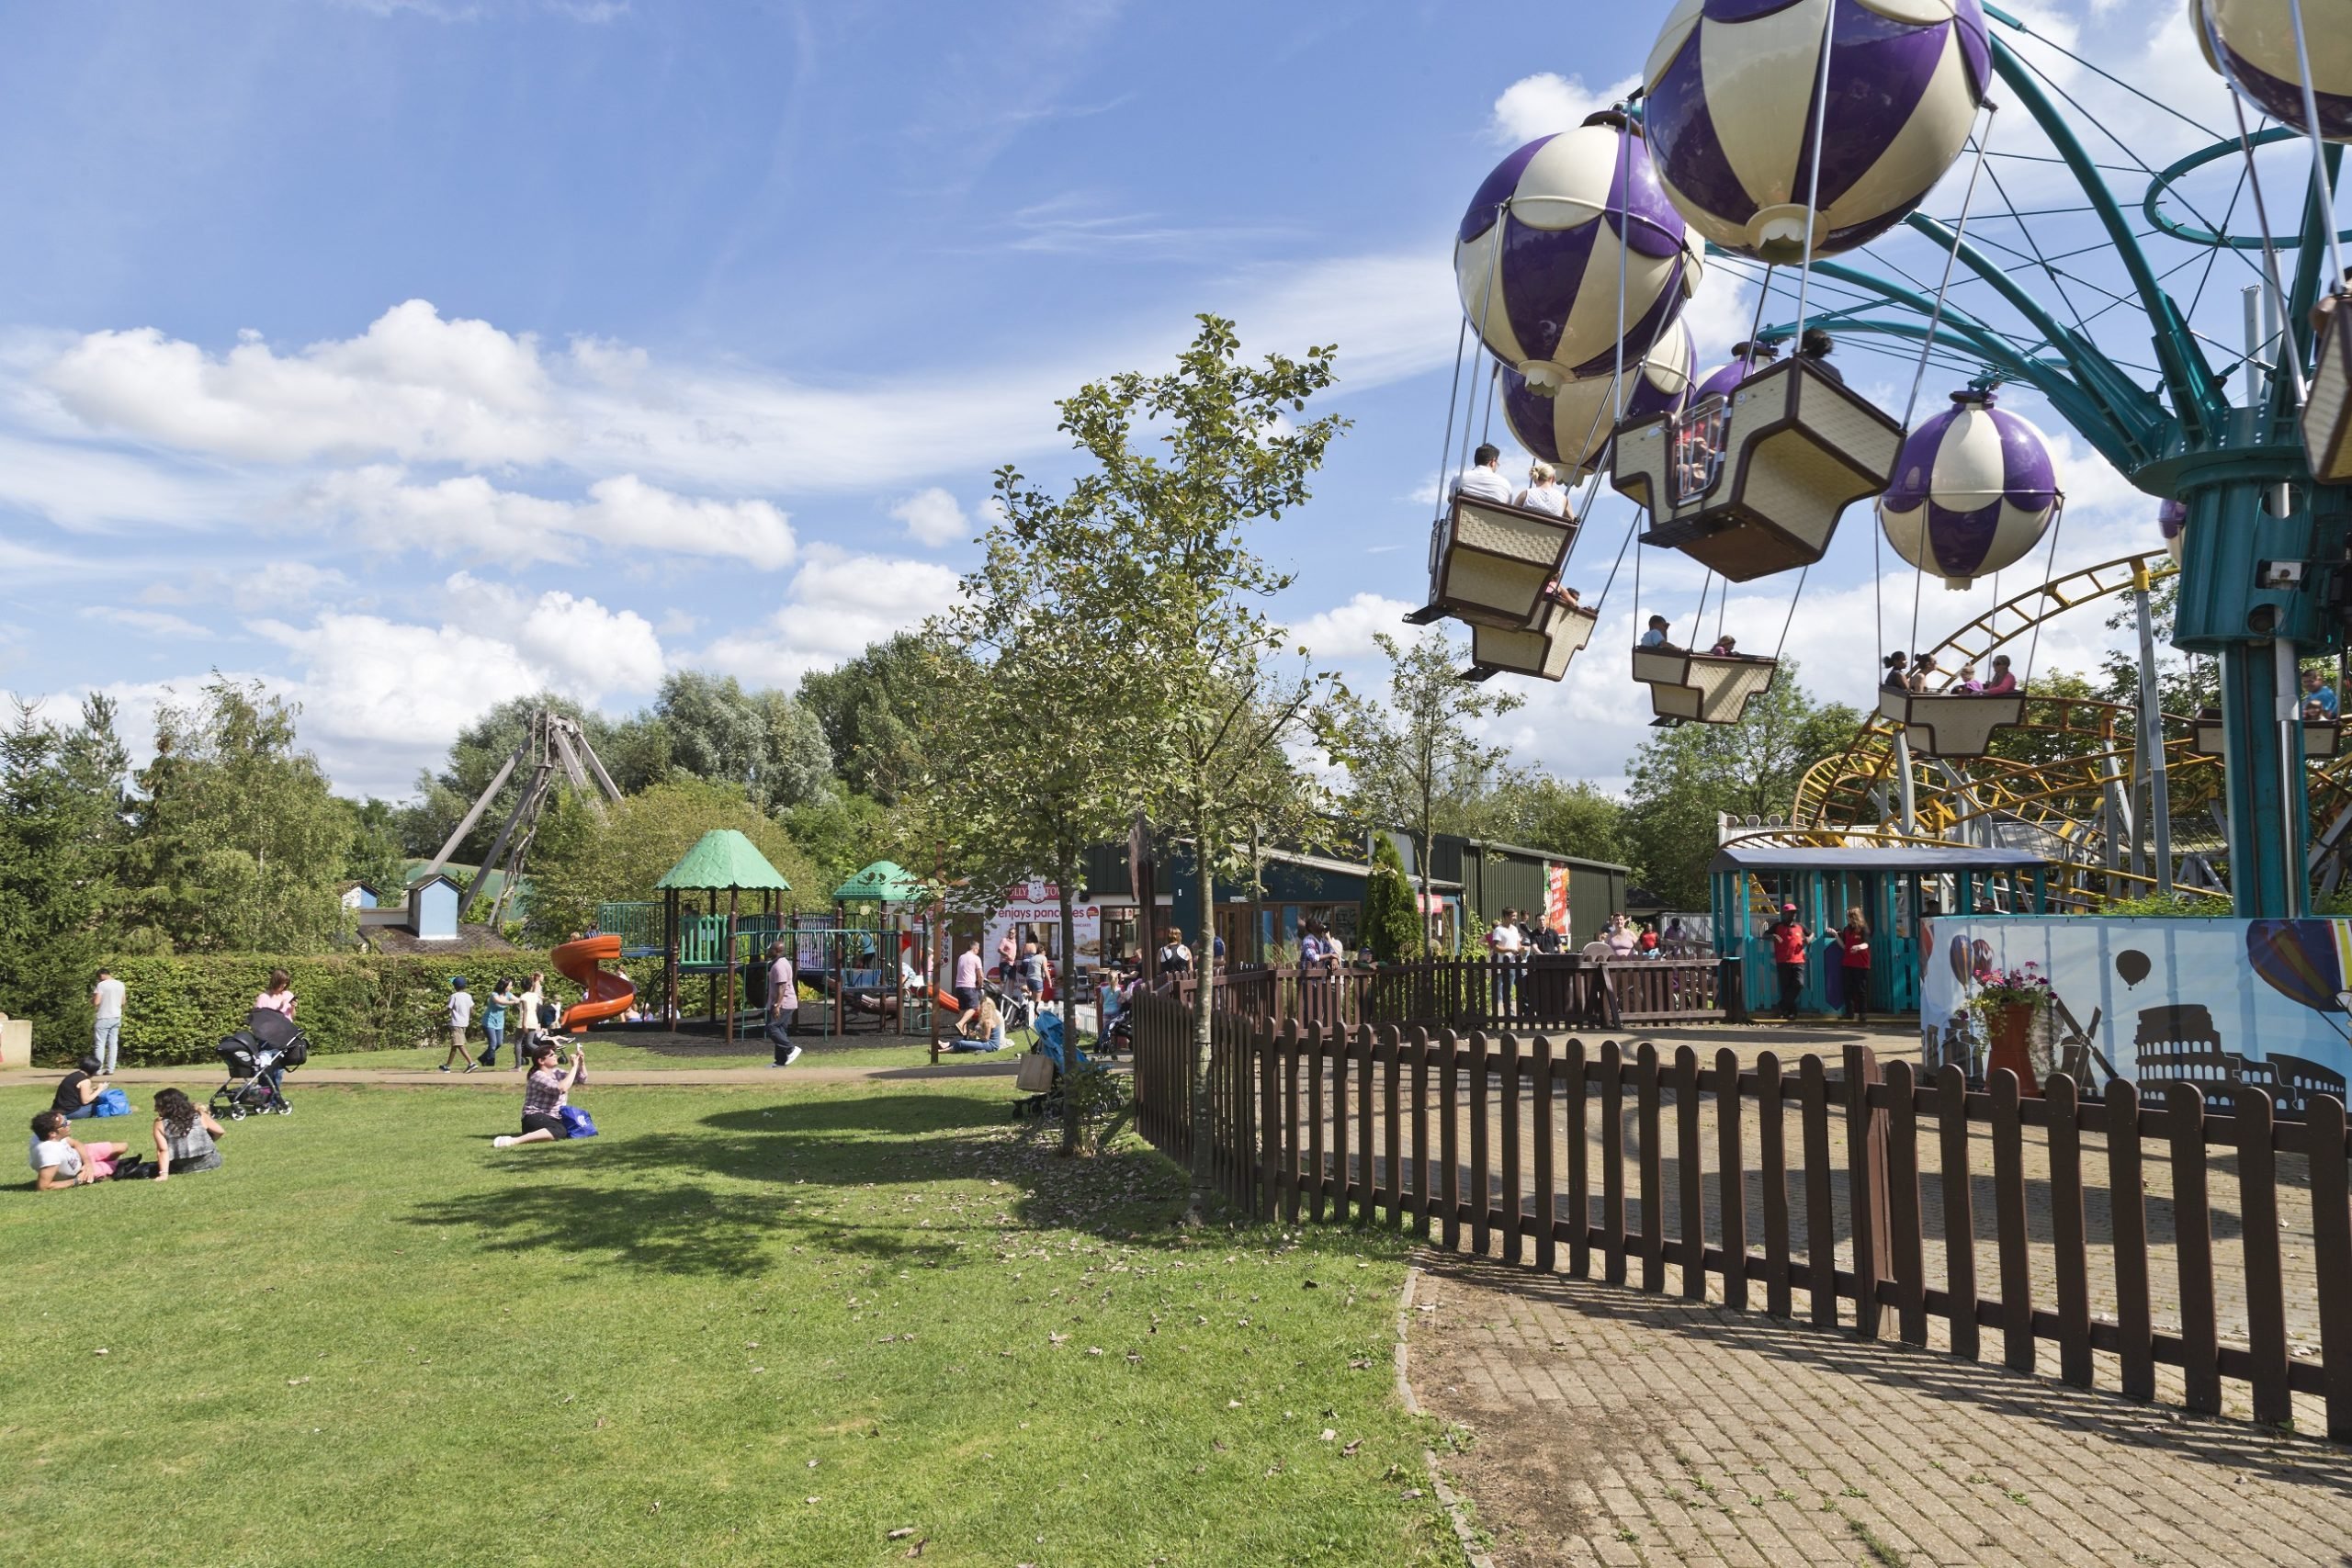 Opening hours at Gulliver’s Land extended due to demand